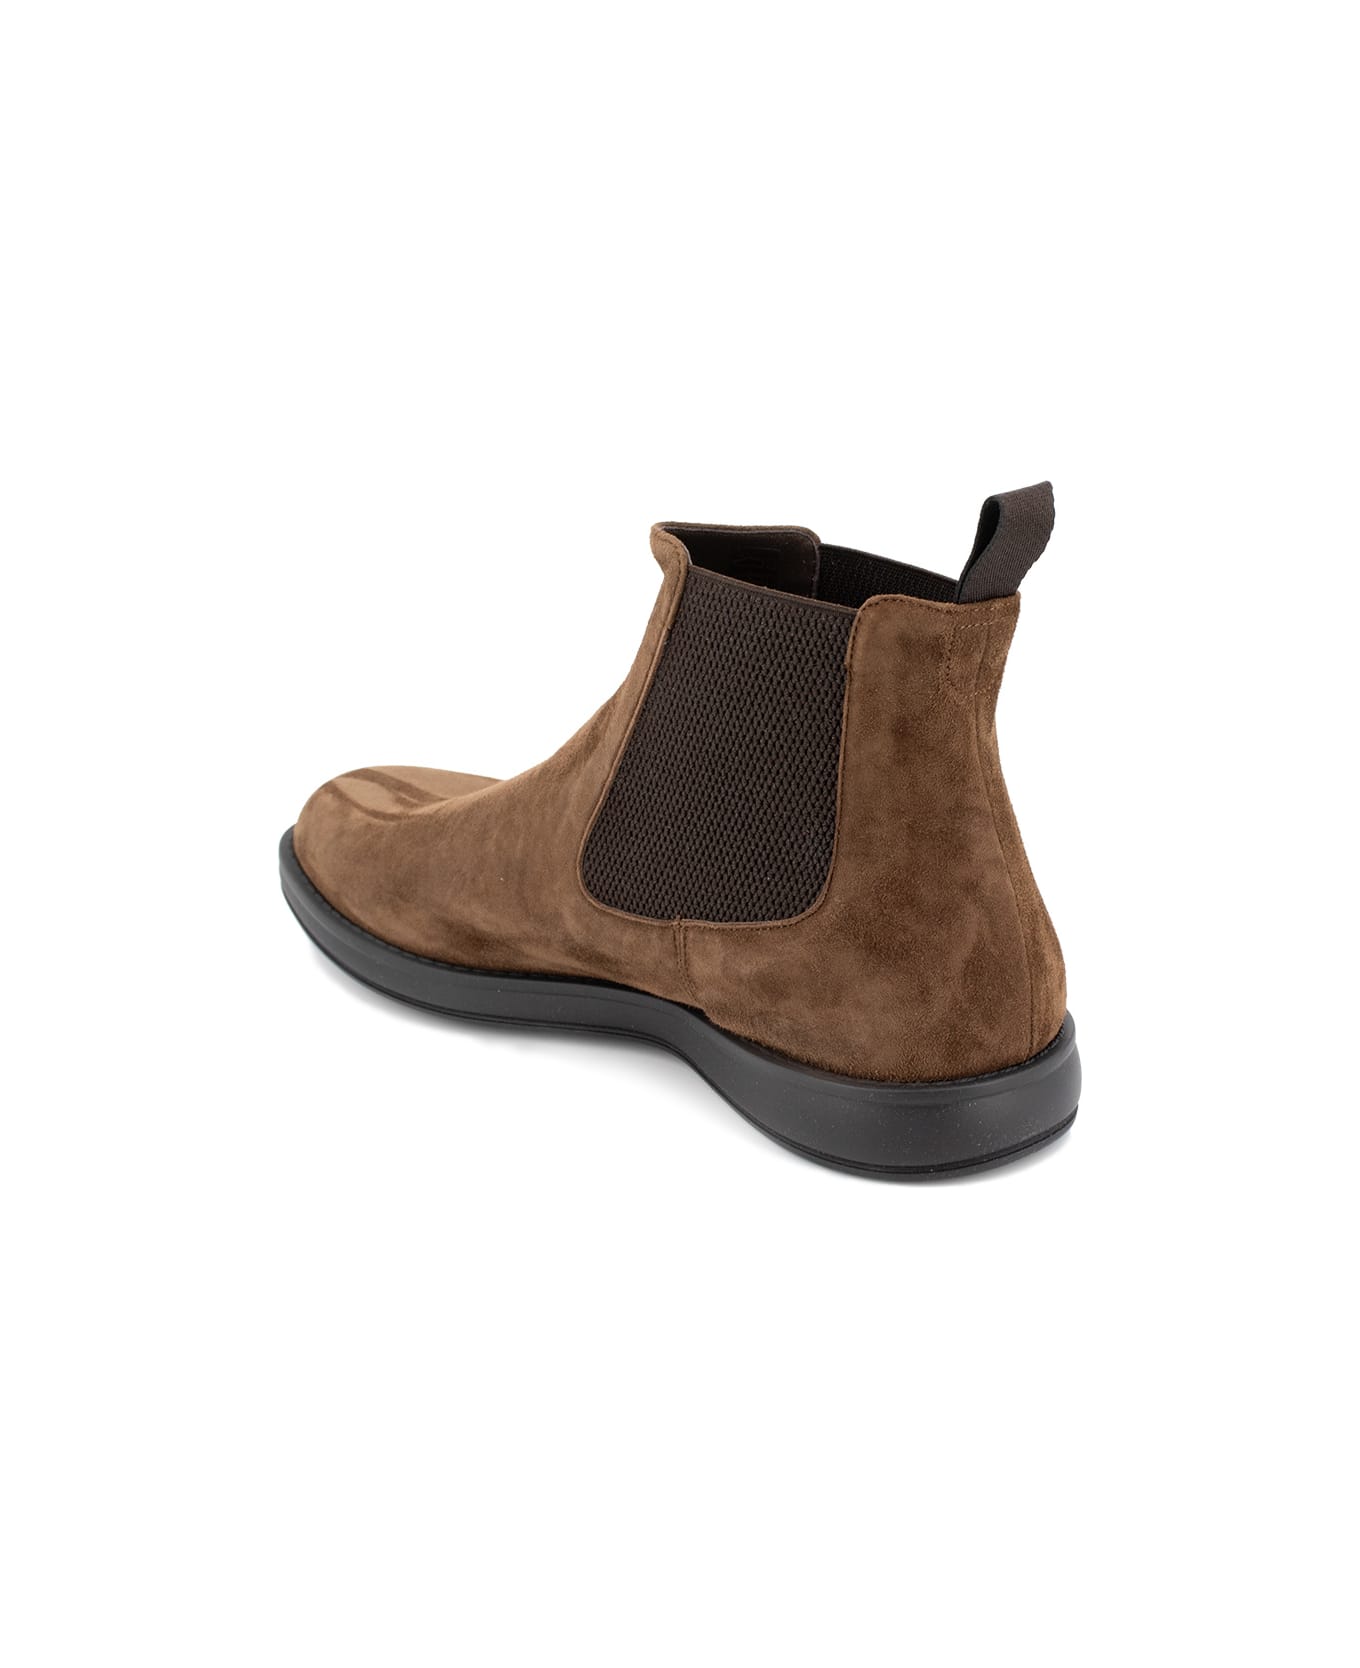 Brioni Ankle Boots - BROWN ブーツ